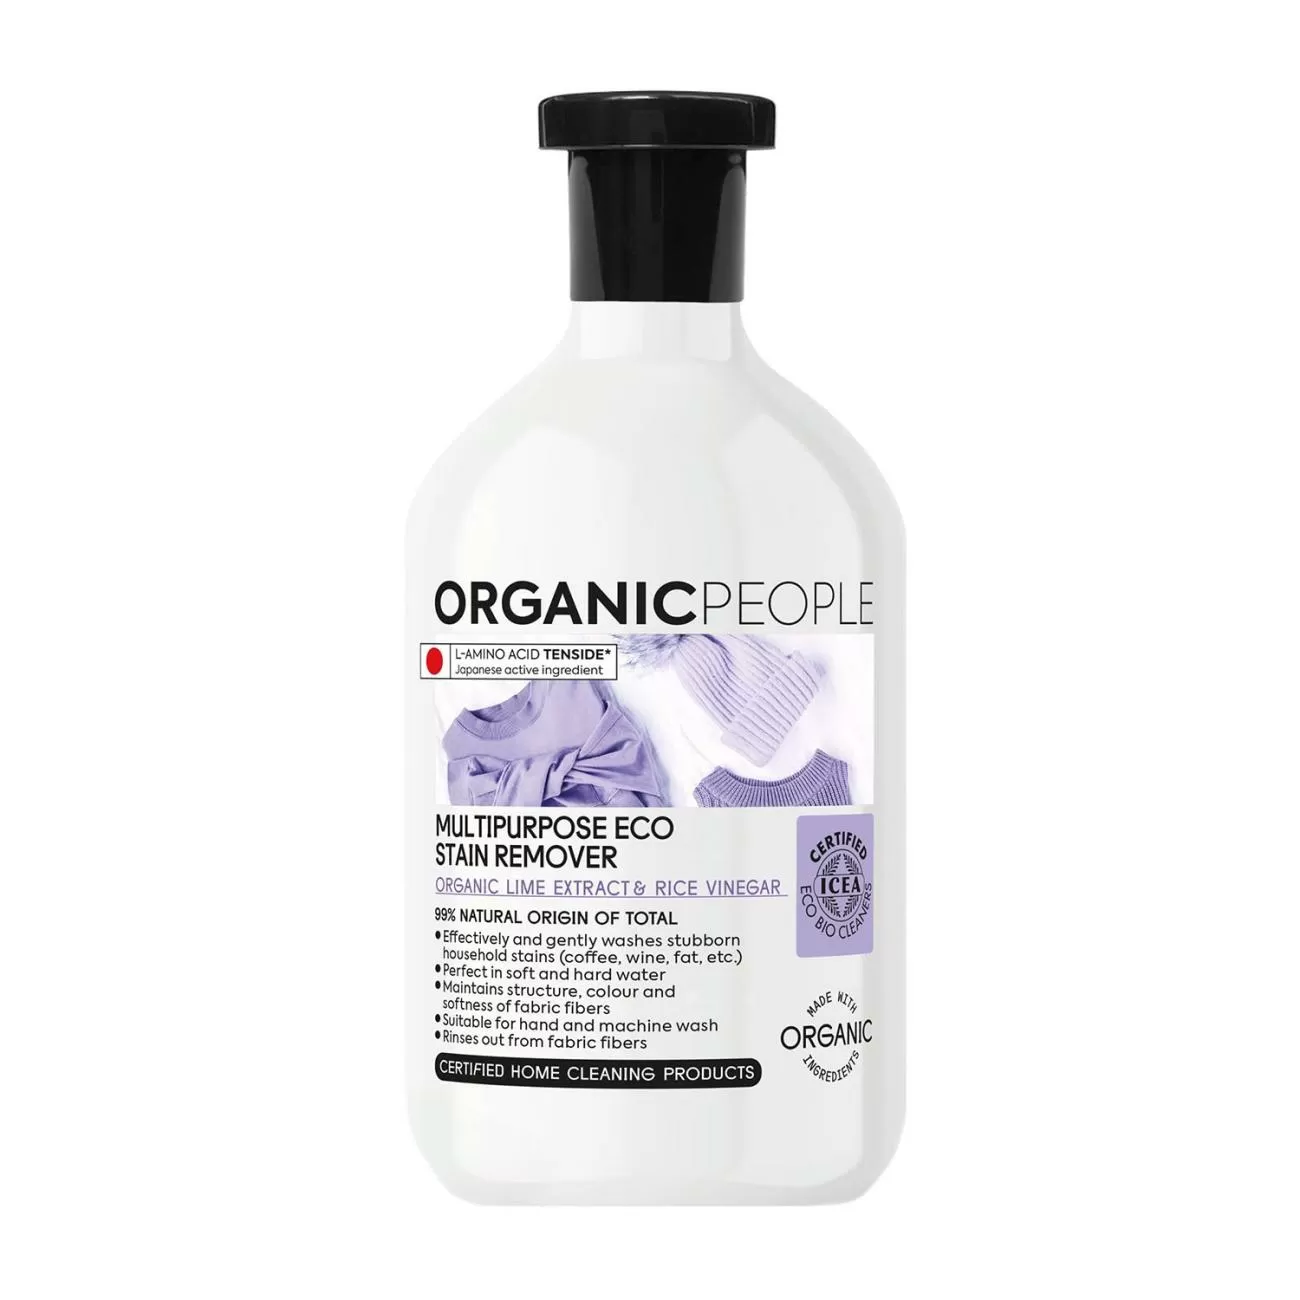 ORGANIC PEOPLE LIME EXTRACT RICE VINEGAR MULTI-PURPOSE ECO STAIN REMOVER 200ML